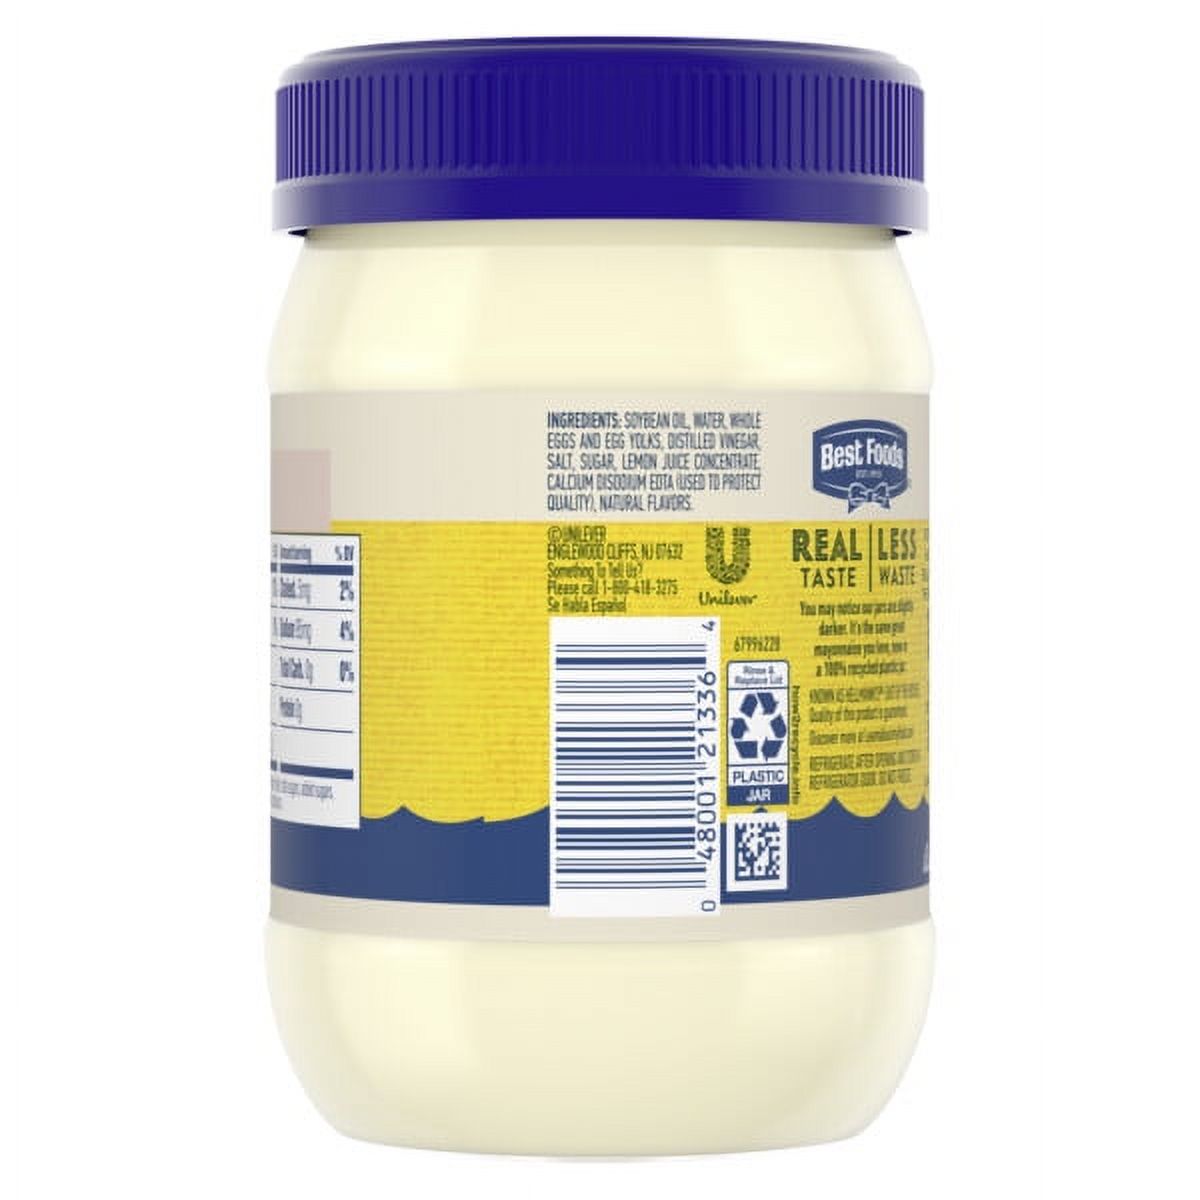 Best Foods Made with Cage Free Eggs Real Mayonnaise, 15 fl oz Jar - image 5 of 12